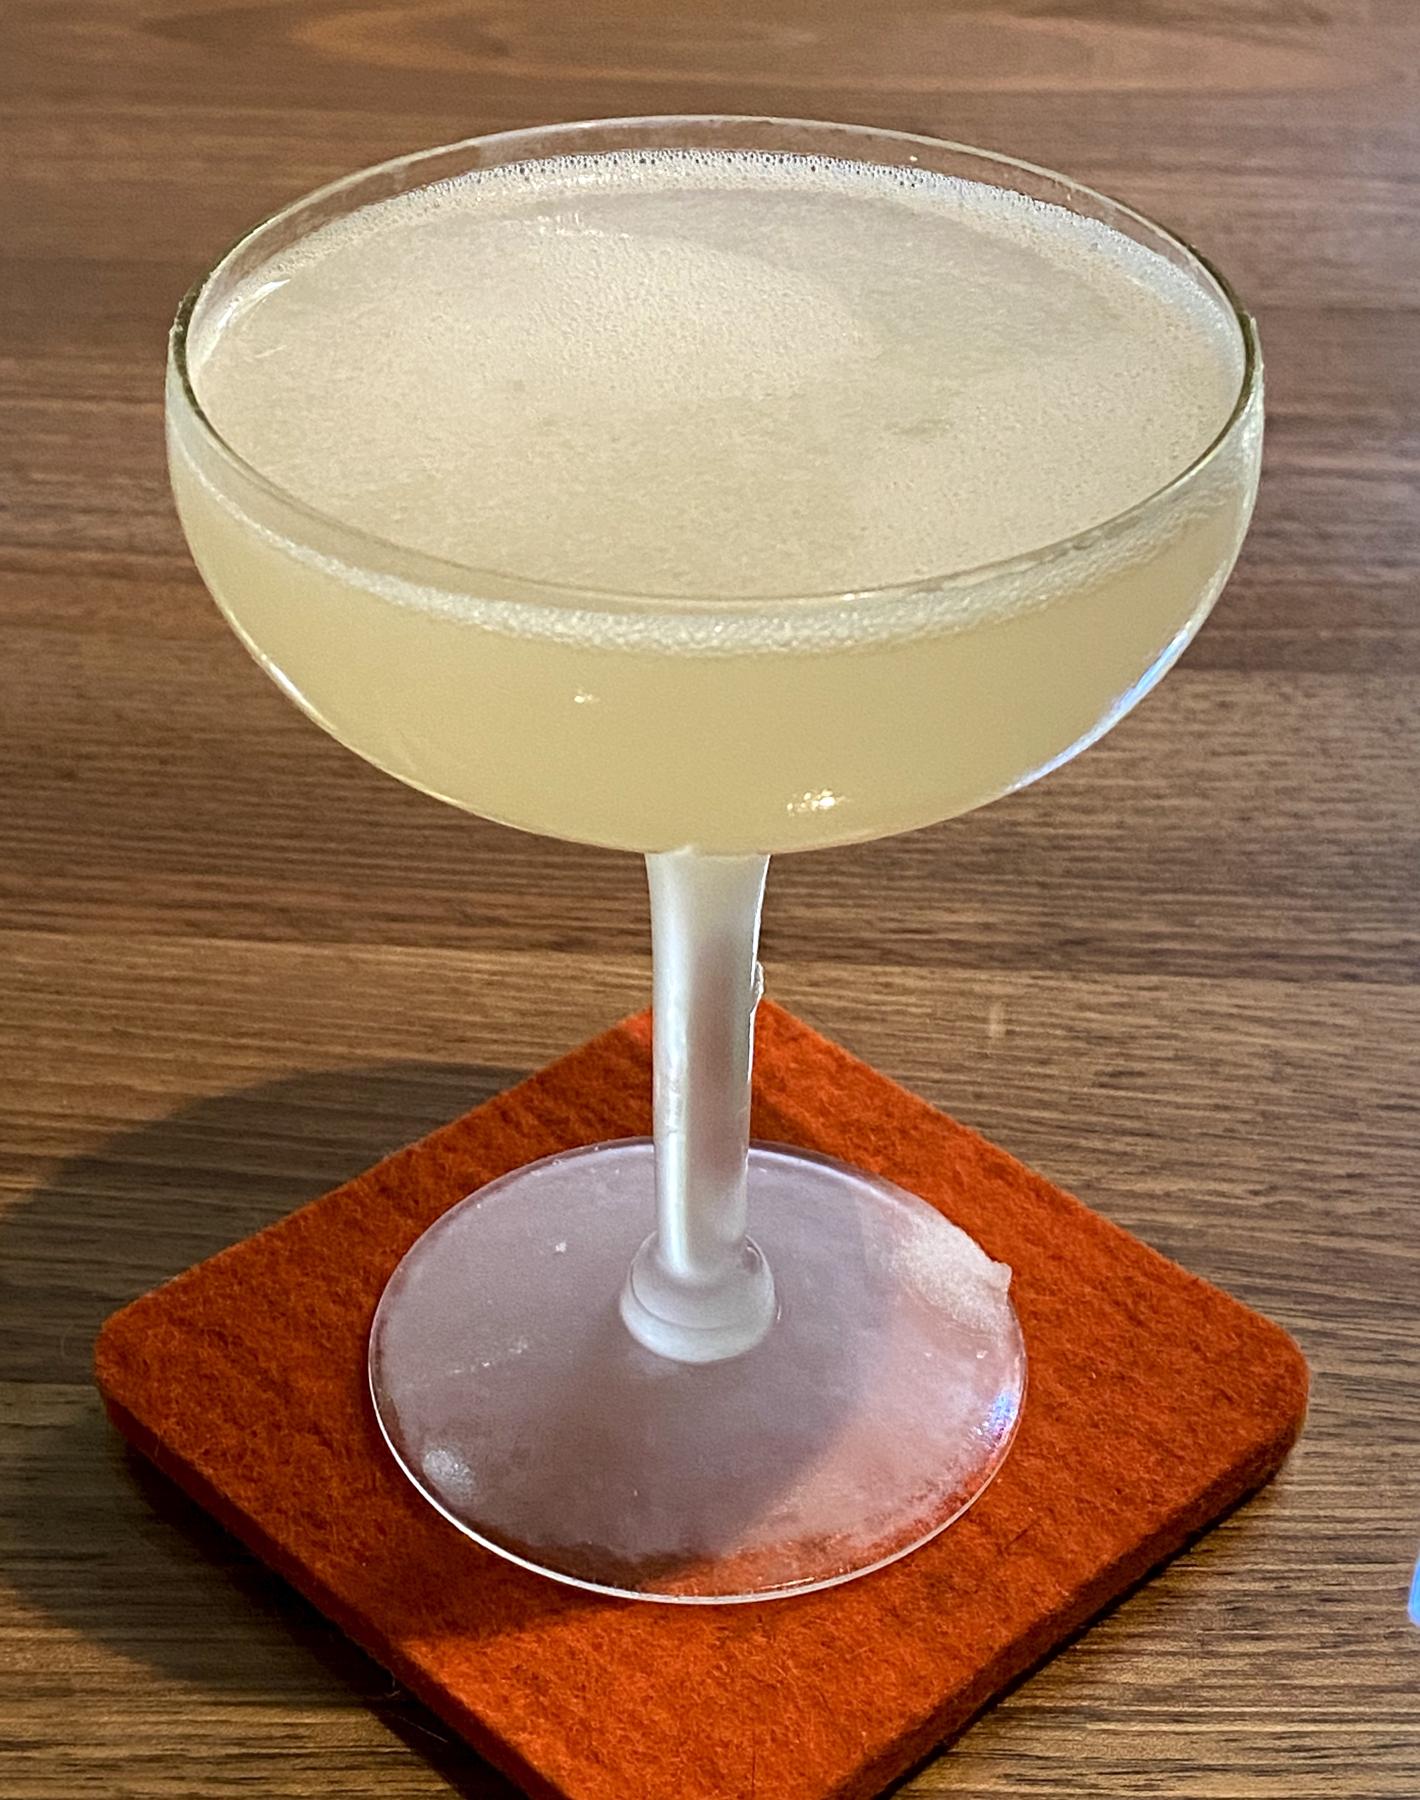 An example of the Mountain Daisy, the mixed drink (drink) featuring Salers Gentian Apéritif, Cocchi Americano Bianco, lime juice, and salt; photo by Martin Doudoroff